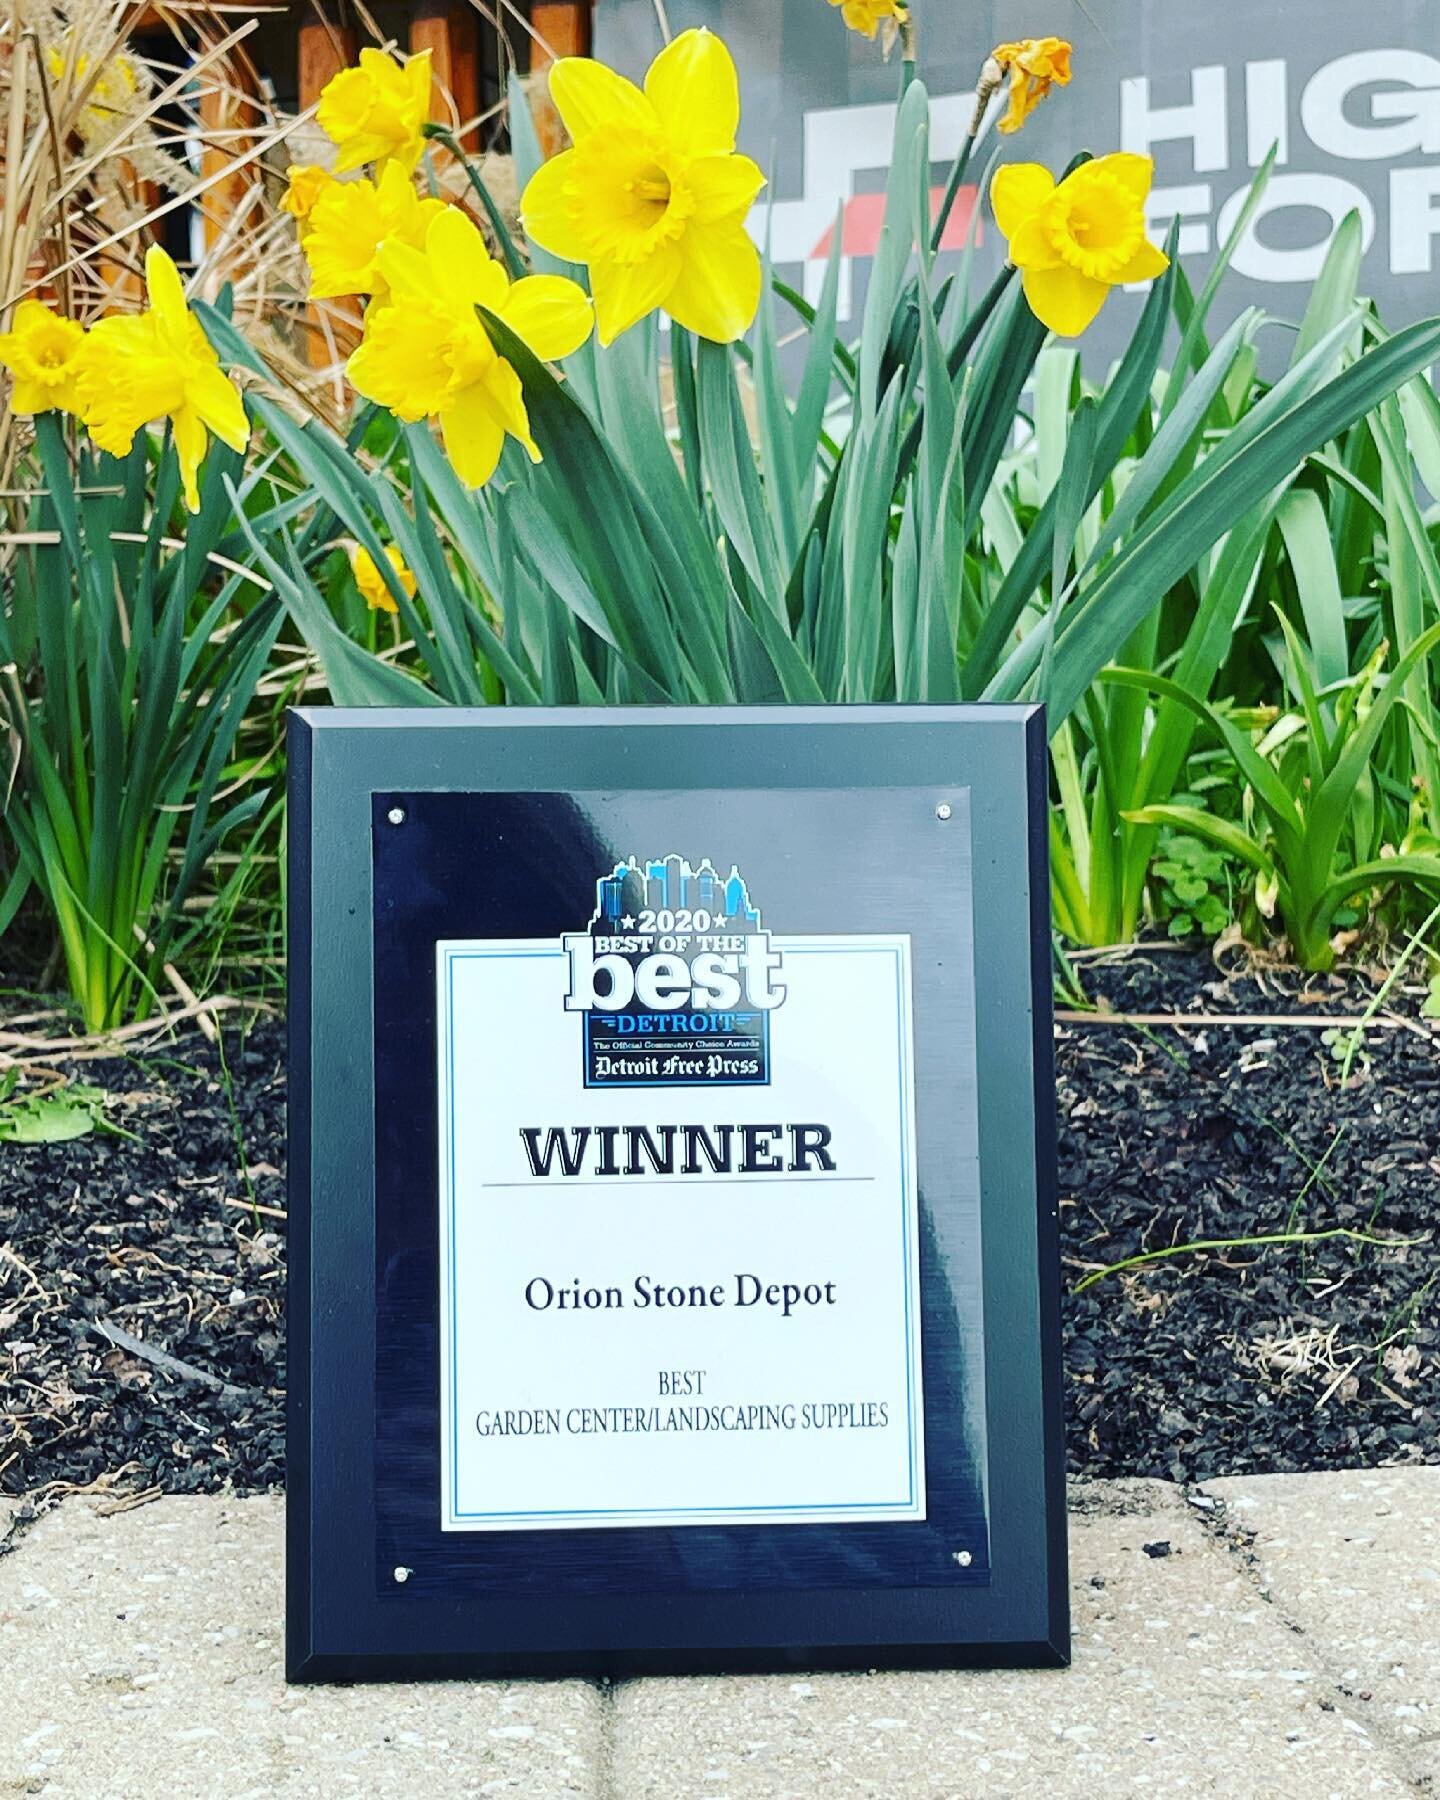 We are pleased to announce that we were voted Best Garden Center &amp; Landscape Supply in Detroit! Thank you to all those who voted and made us #1. An, Thank you for all of your continued support especially during these unsure times. 

#detroitbesto